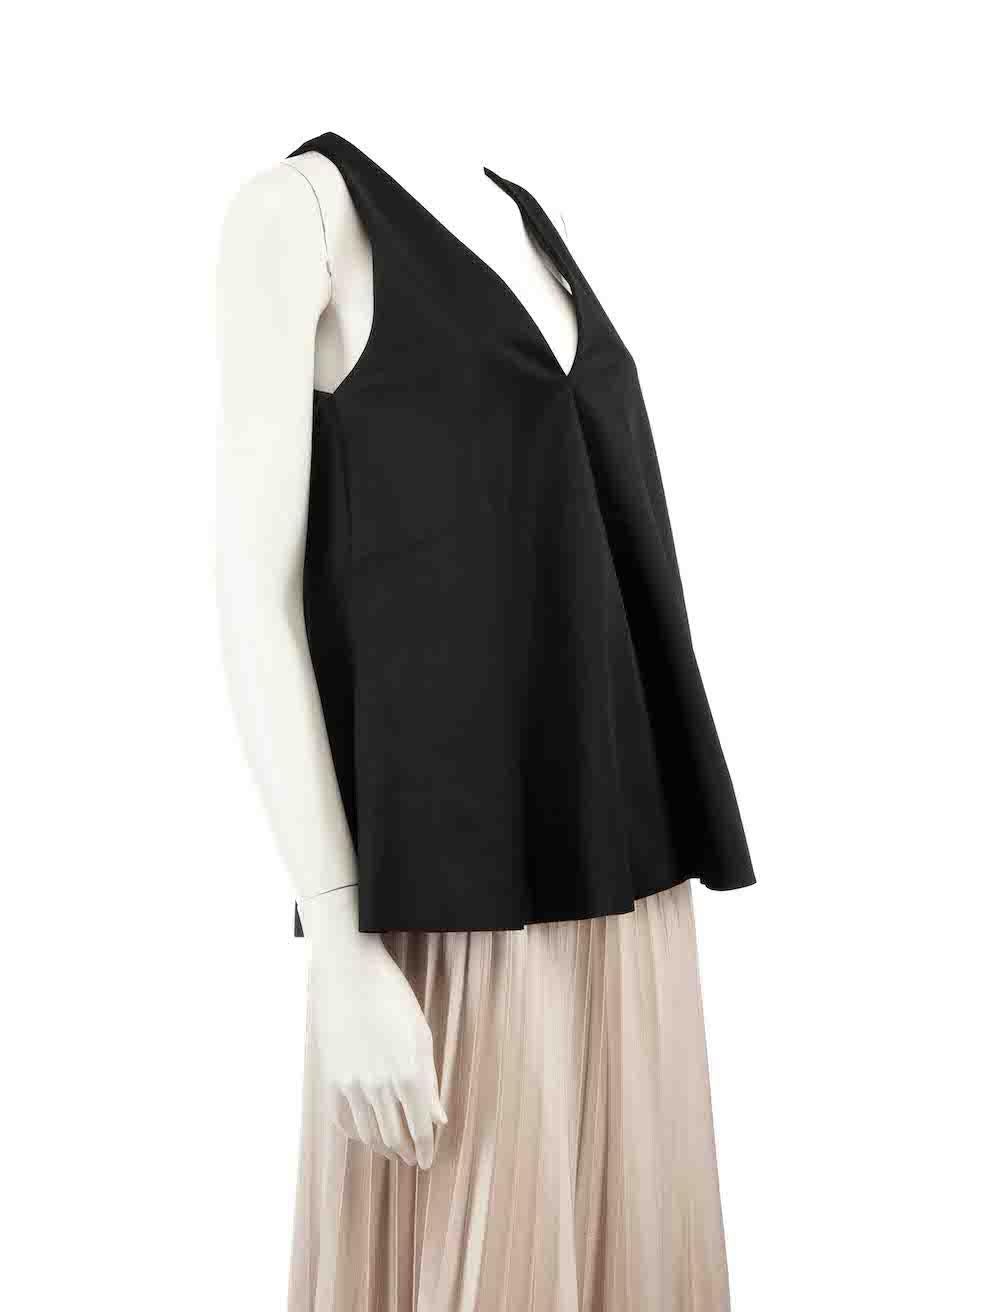 CONDITION is Very good. Hardly any visible wear to top is evident on this used Acler designer resale item.
 
 
 
 Details
 
 
 Black
 
 Polyester
 
 Trapeze top
 
 Sleeveless
 
 V-neck
 
 
 
 
 
 Made in China
 
 
 
 Composition
 
 100% Polyester
 
